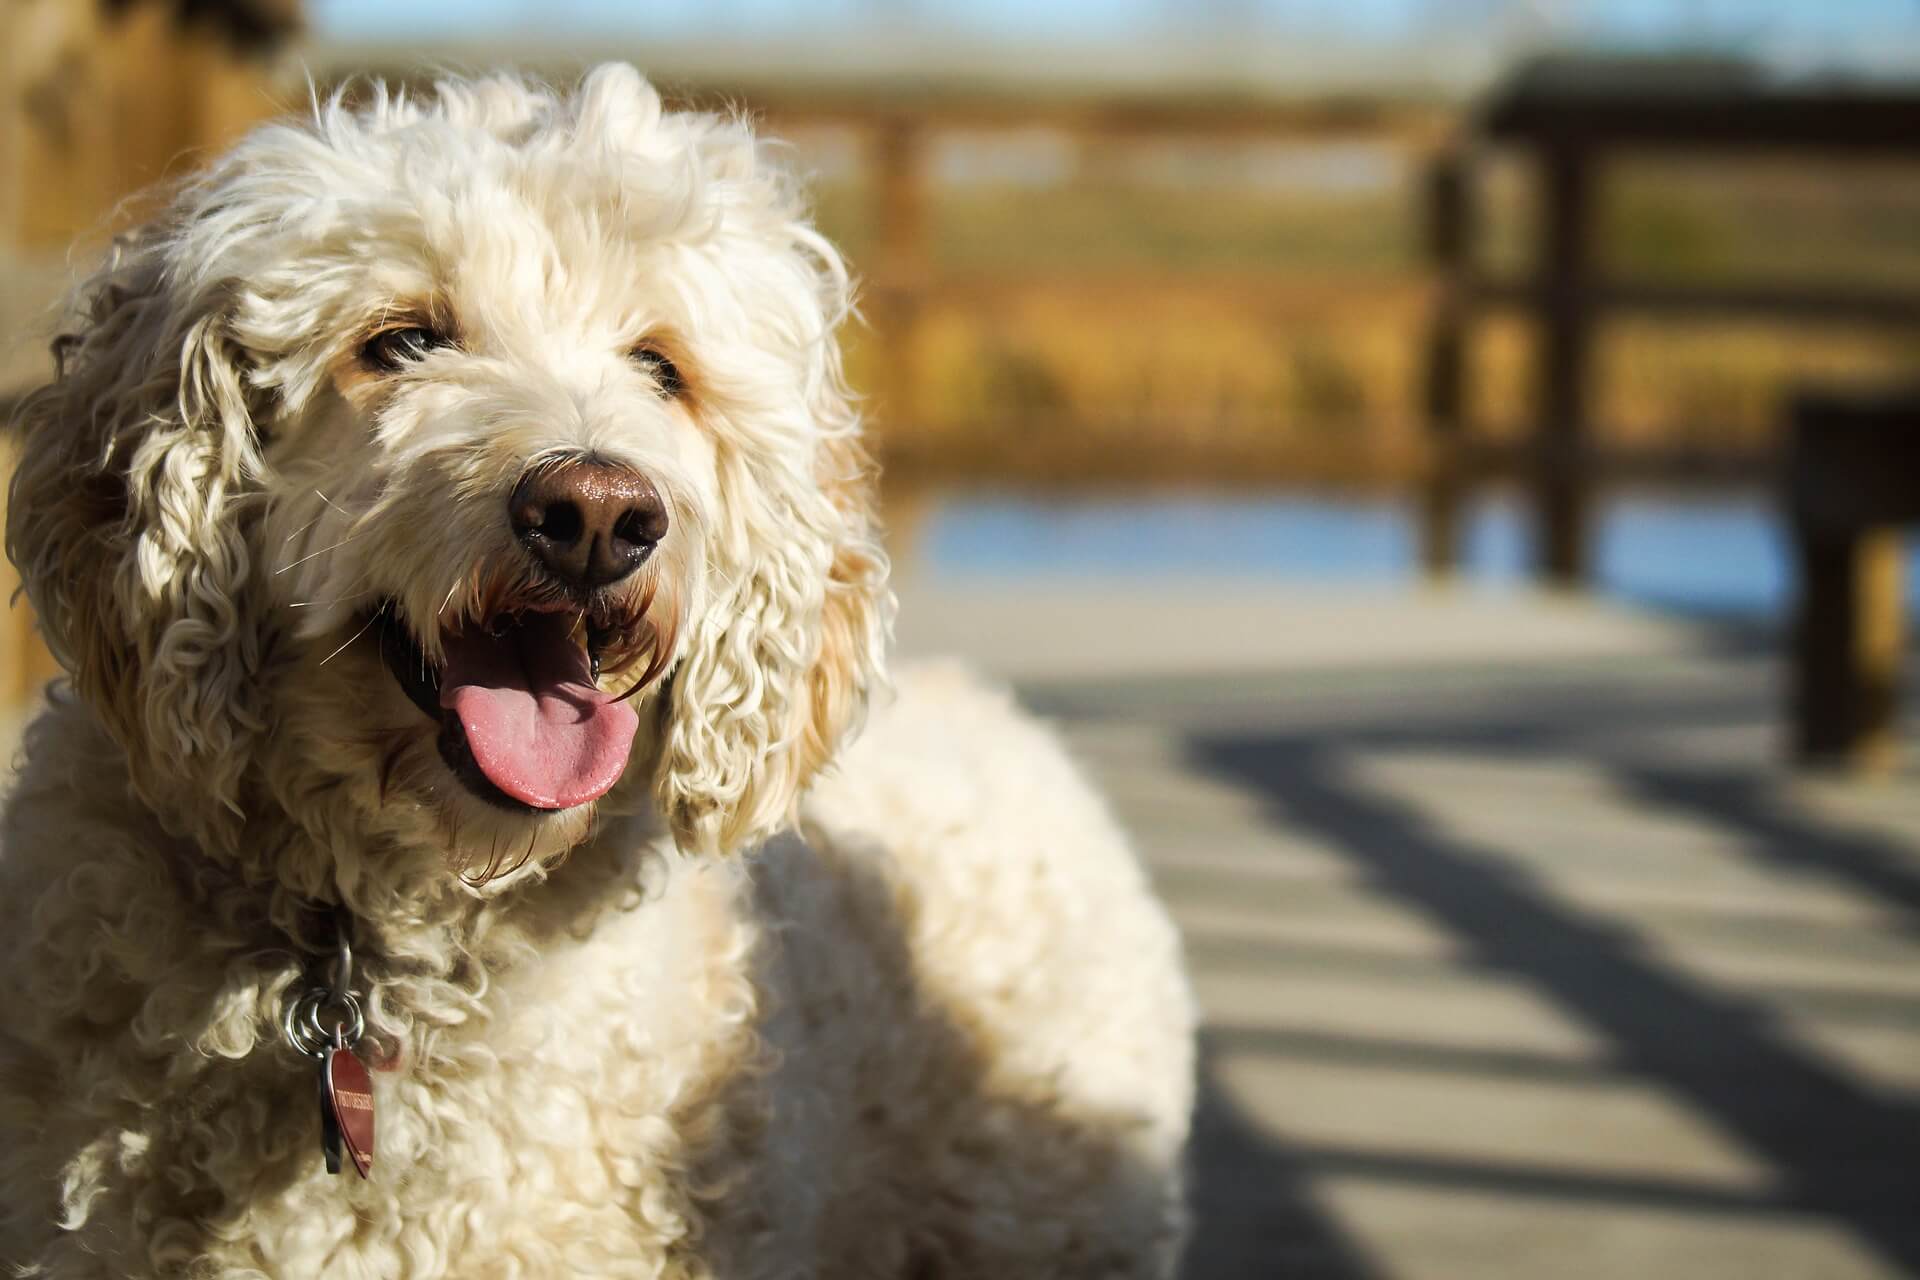 Can a Miniature Poodle Be a Service Dog?